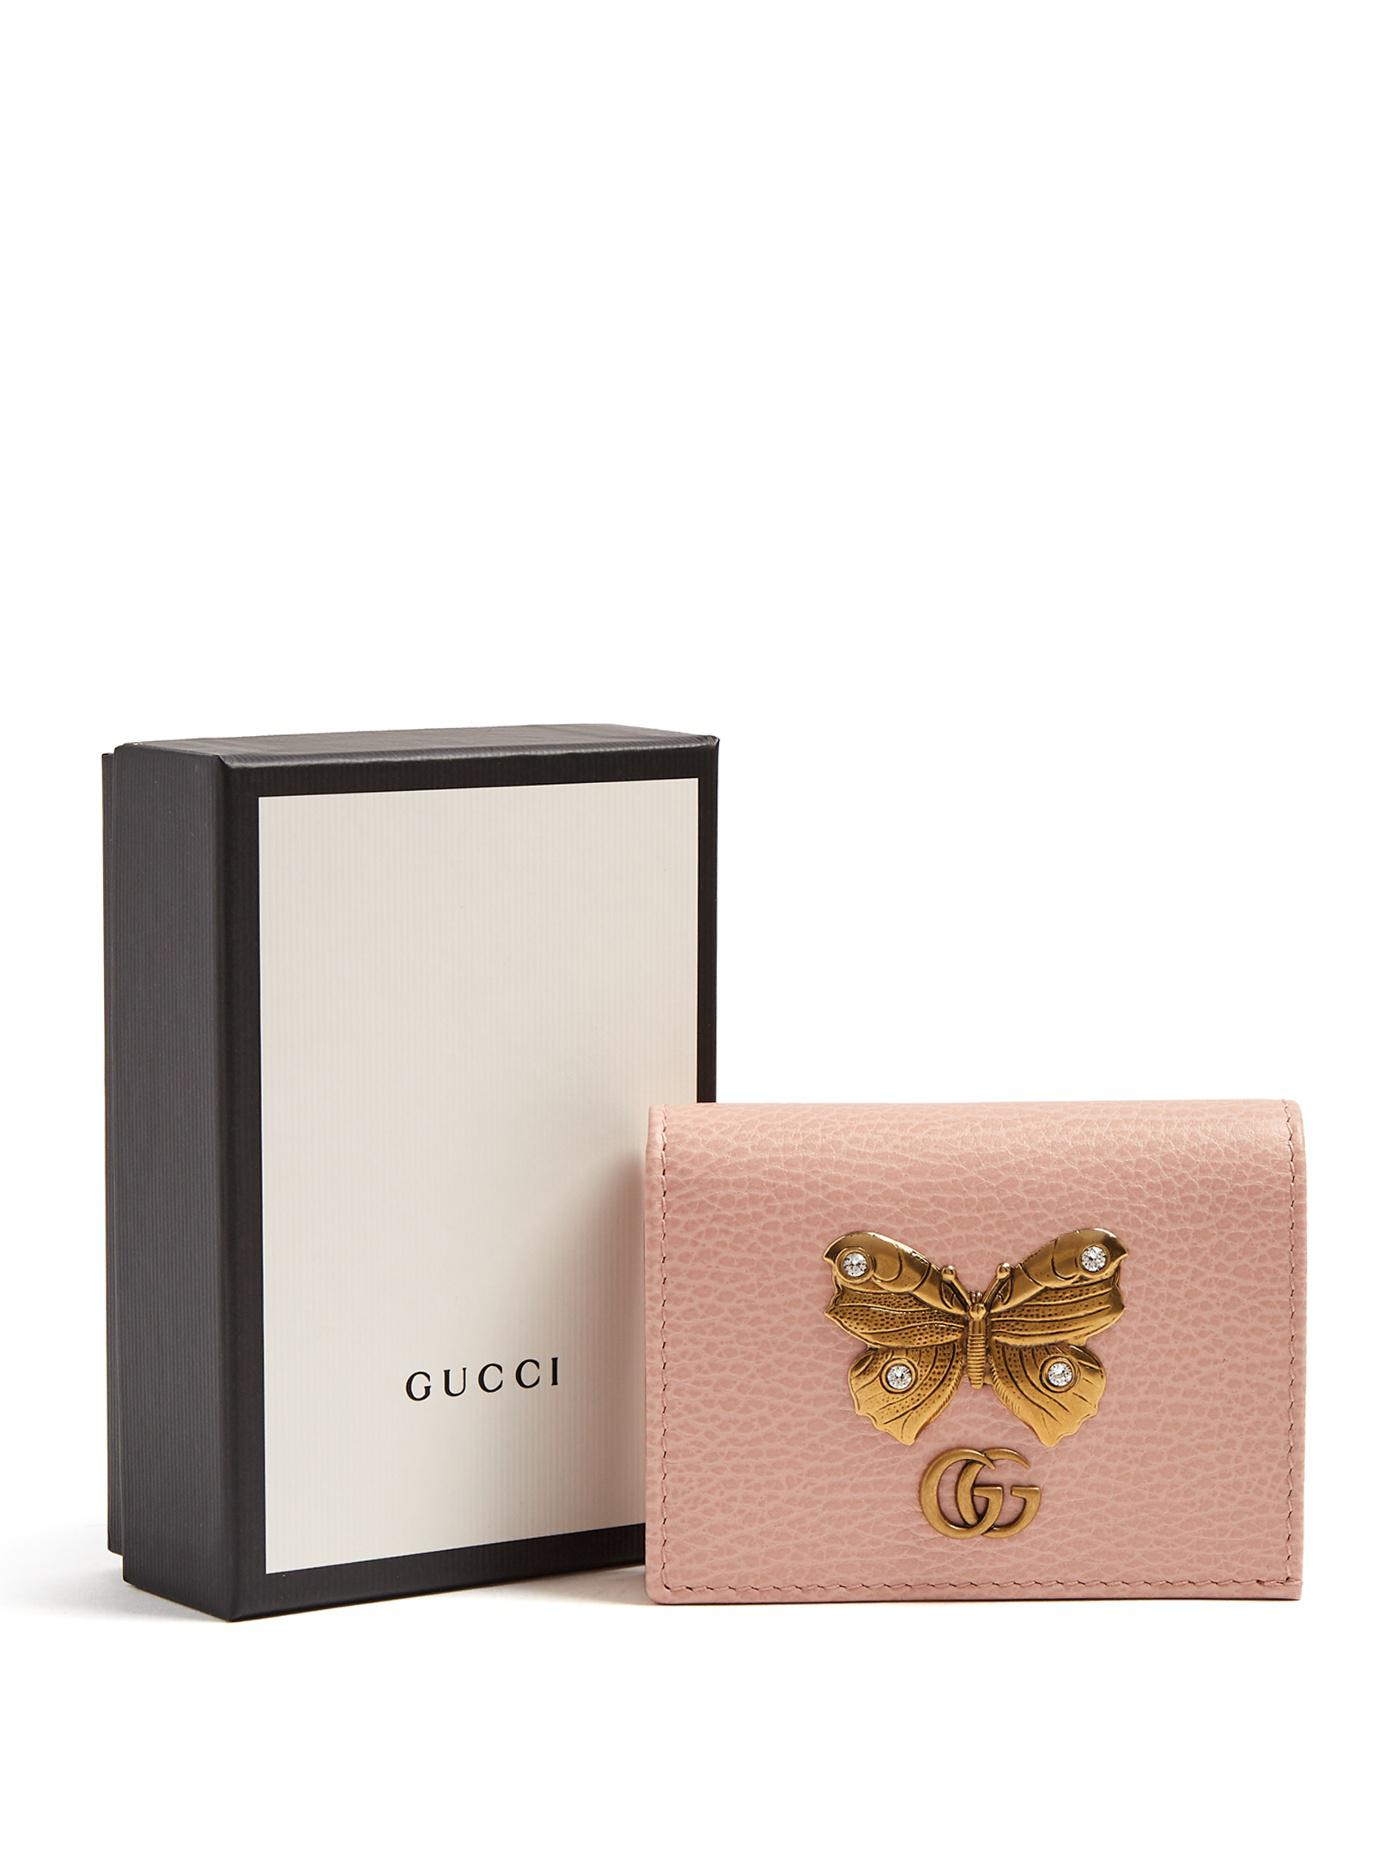 Gucci Butterfly-embellished Leather Wallet in Light Pink (Pink) - Lyst